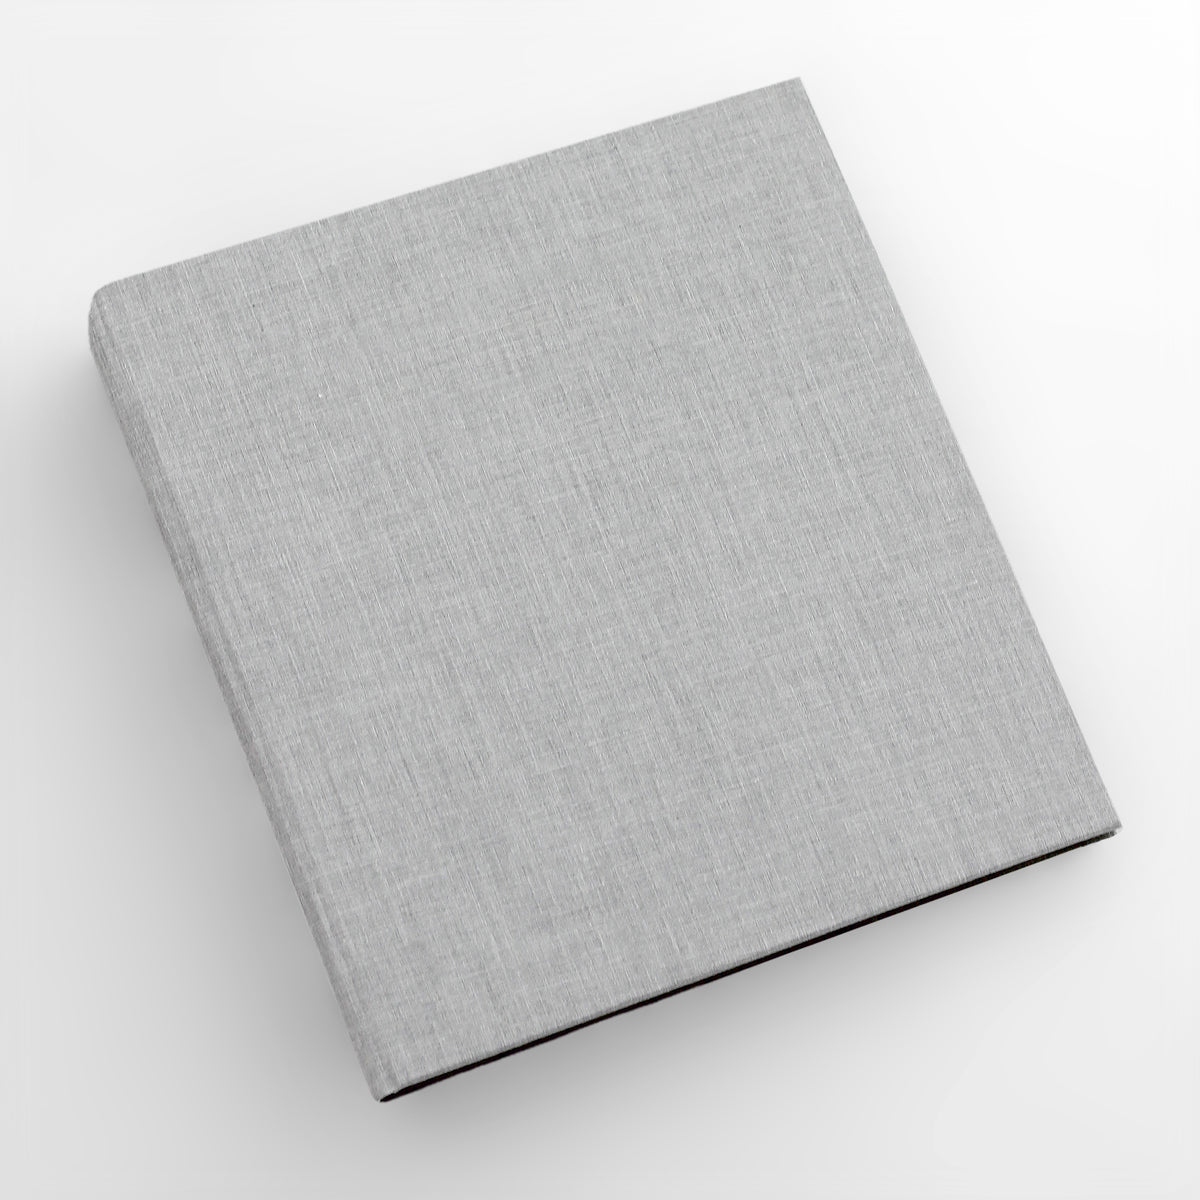 Large Photo Binder For 8x10 Photos | Cover: Dove Gray Cotton | Available Personalized